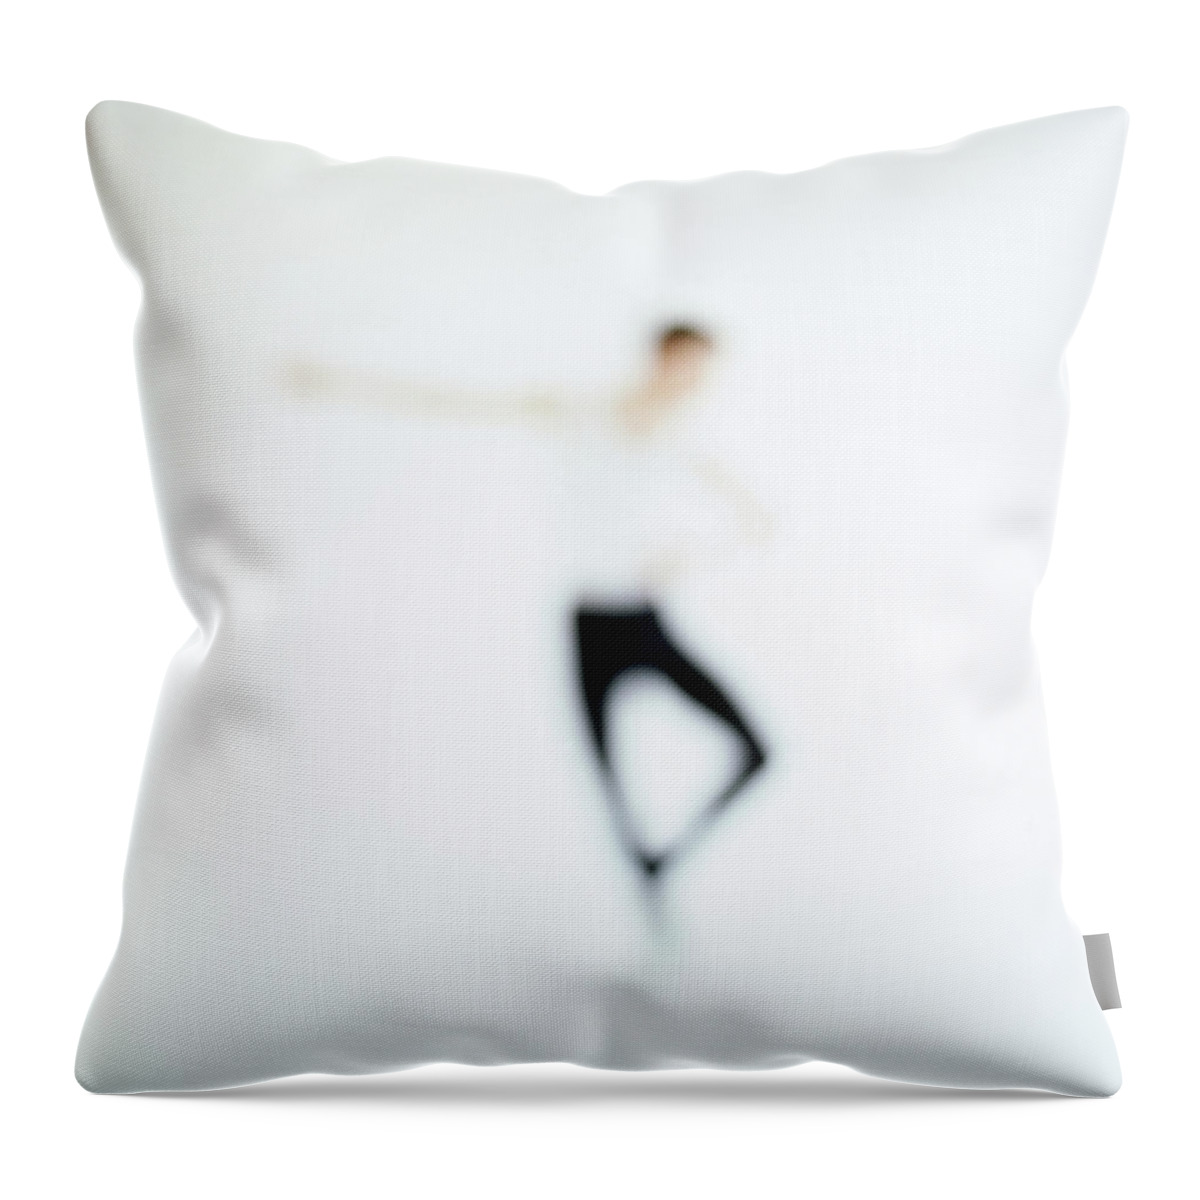 White Background Throw Pillow featuring the photograph Toned View Of A Person Performing Ballet by George Doyle